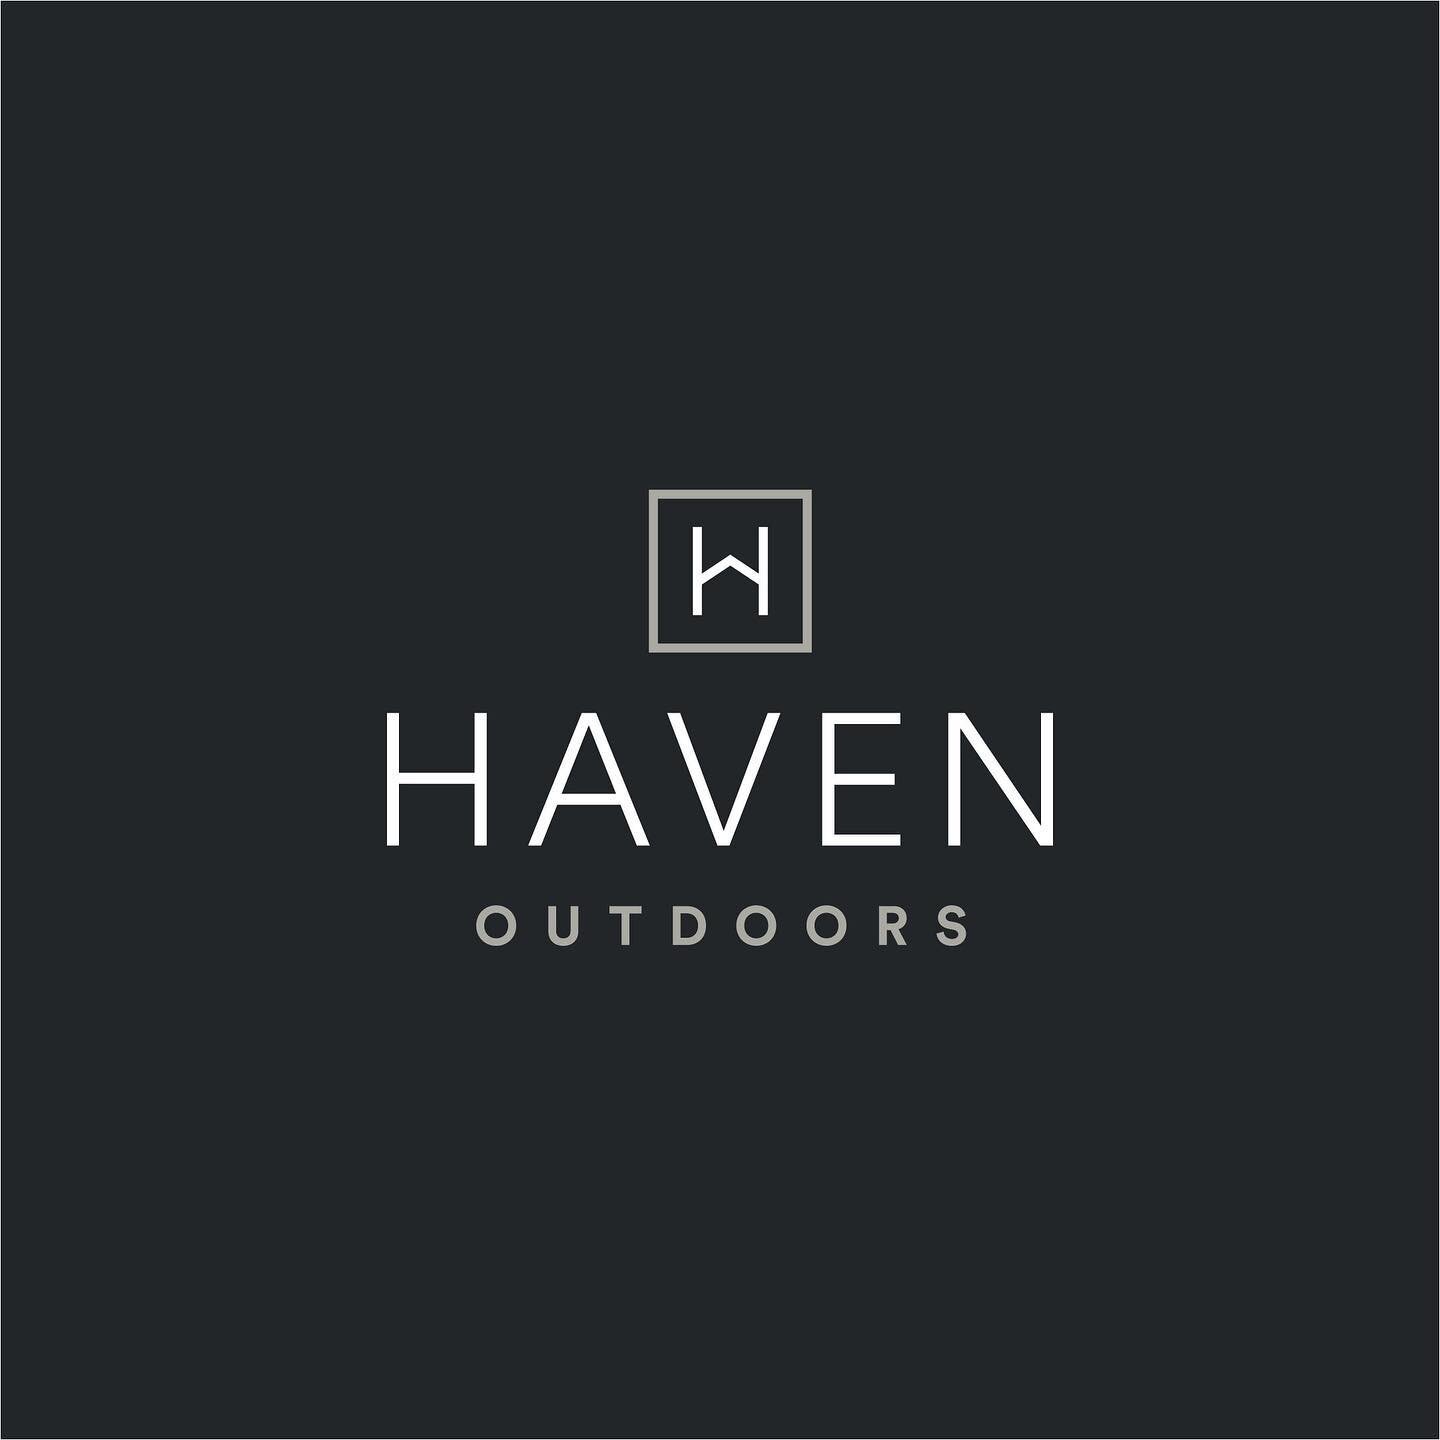 From Infinity to Haven, our evolution has been inspired by you. We're excited to announce our rebrand from Infinity Landscape Services to Haven Outdoors, reflecting our expanded focus on creating full-service outdoor living spaces that elevate your h